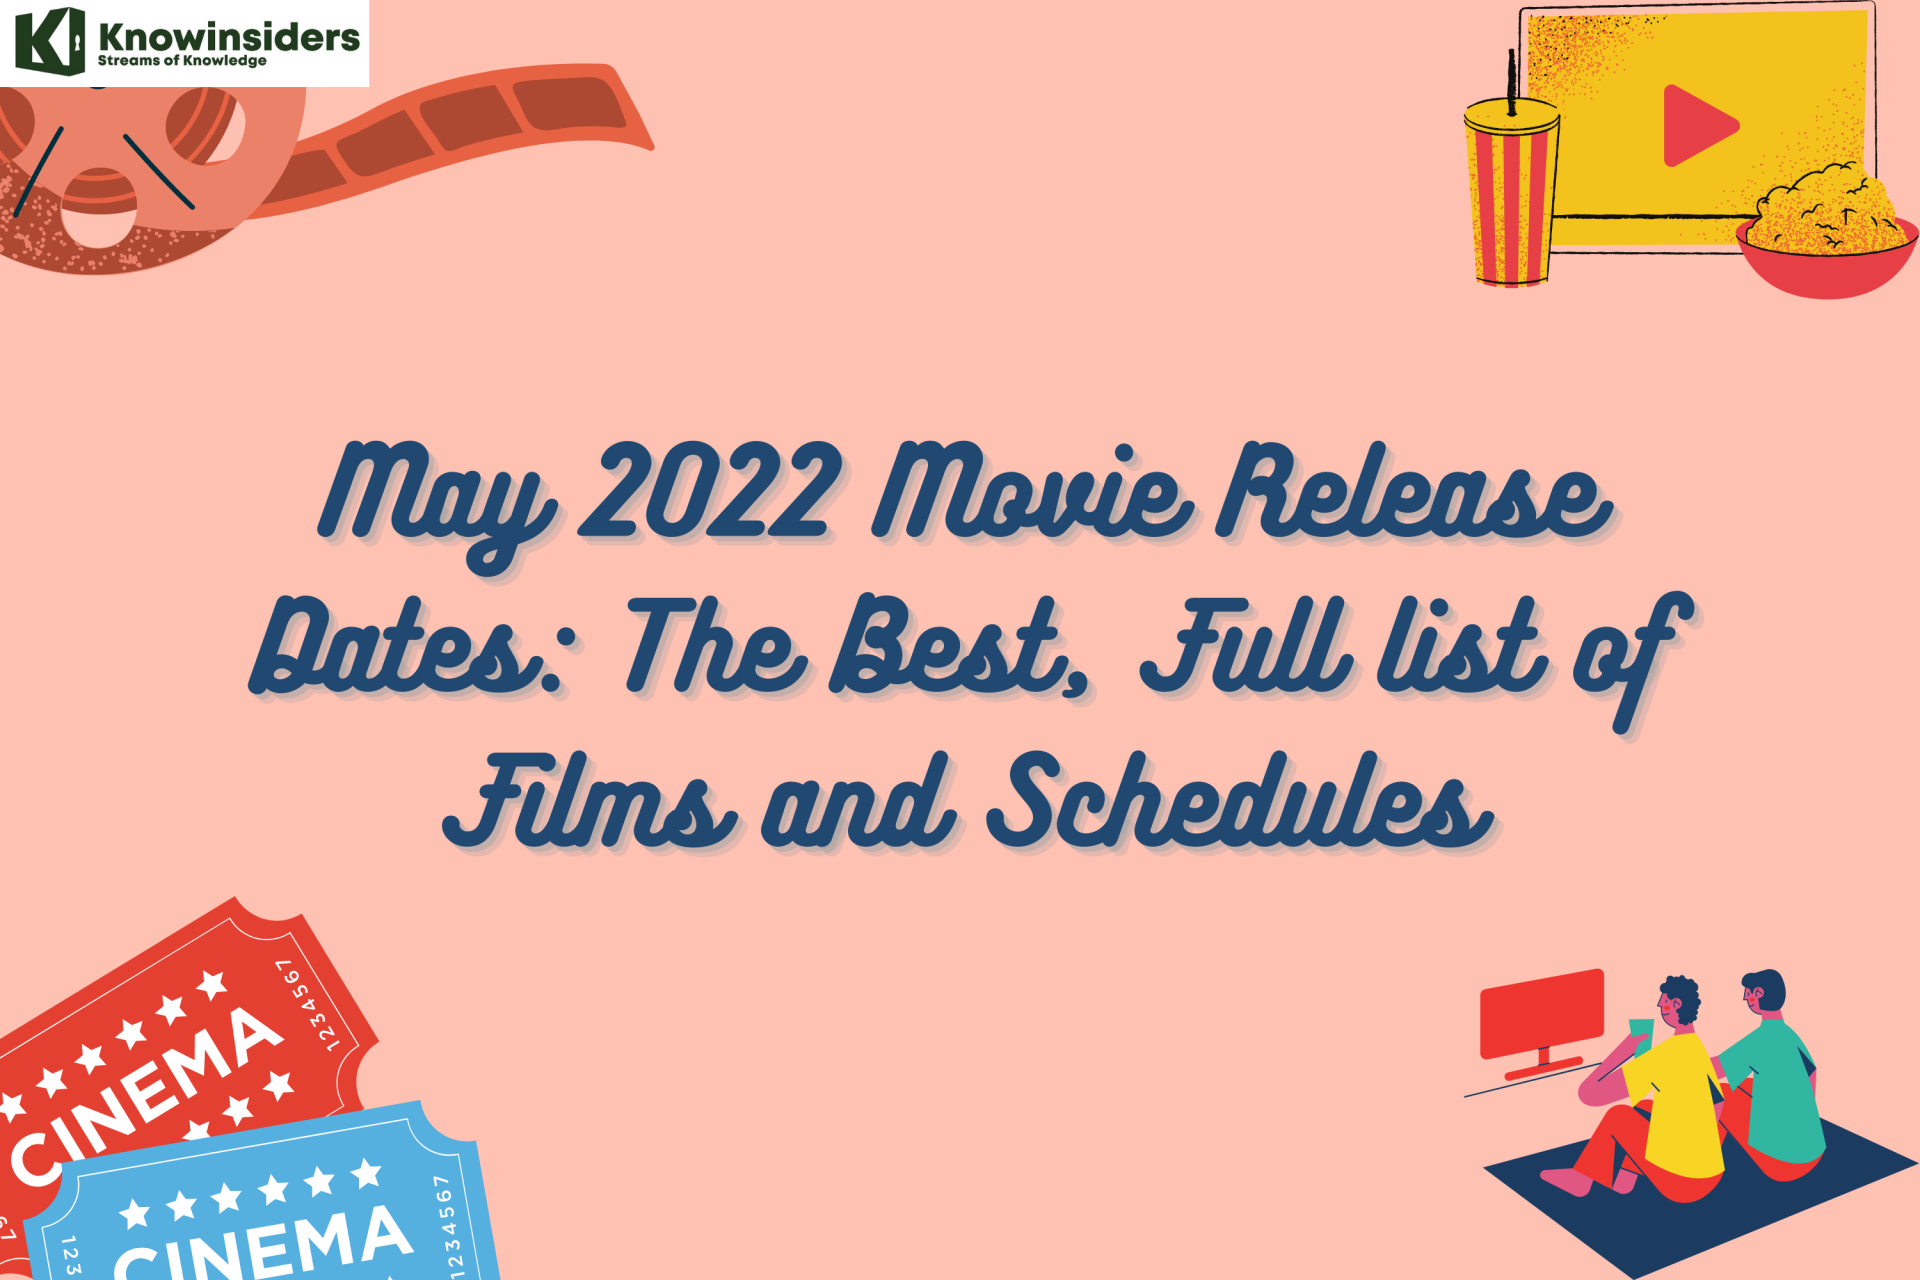 May 2022 Movie Release Dates: The Best, Full list of Films and Schedules